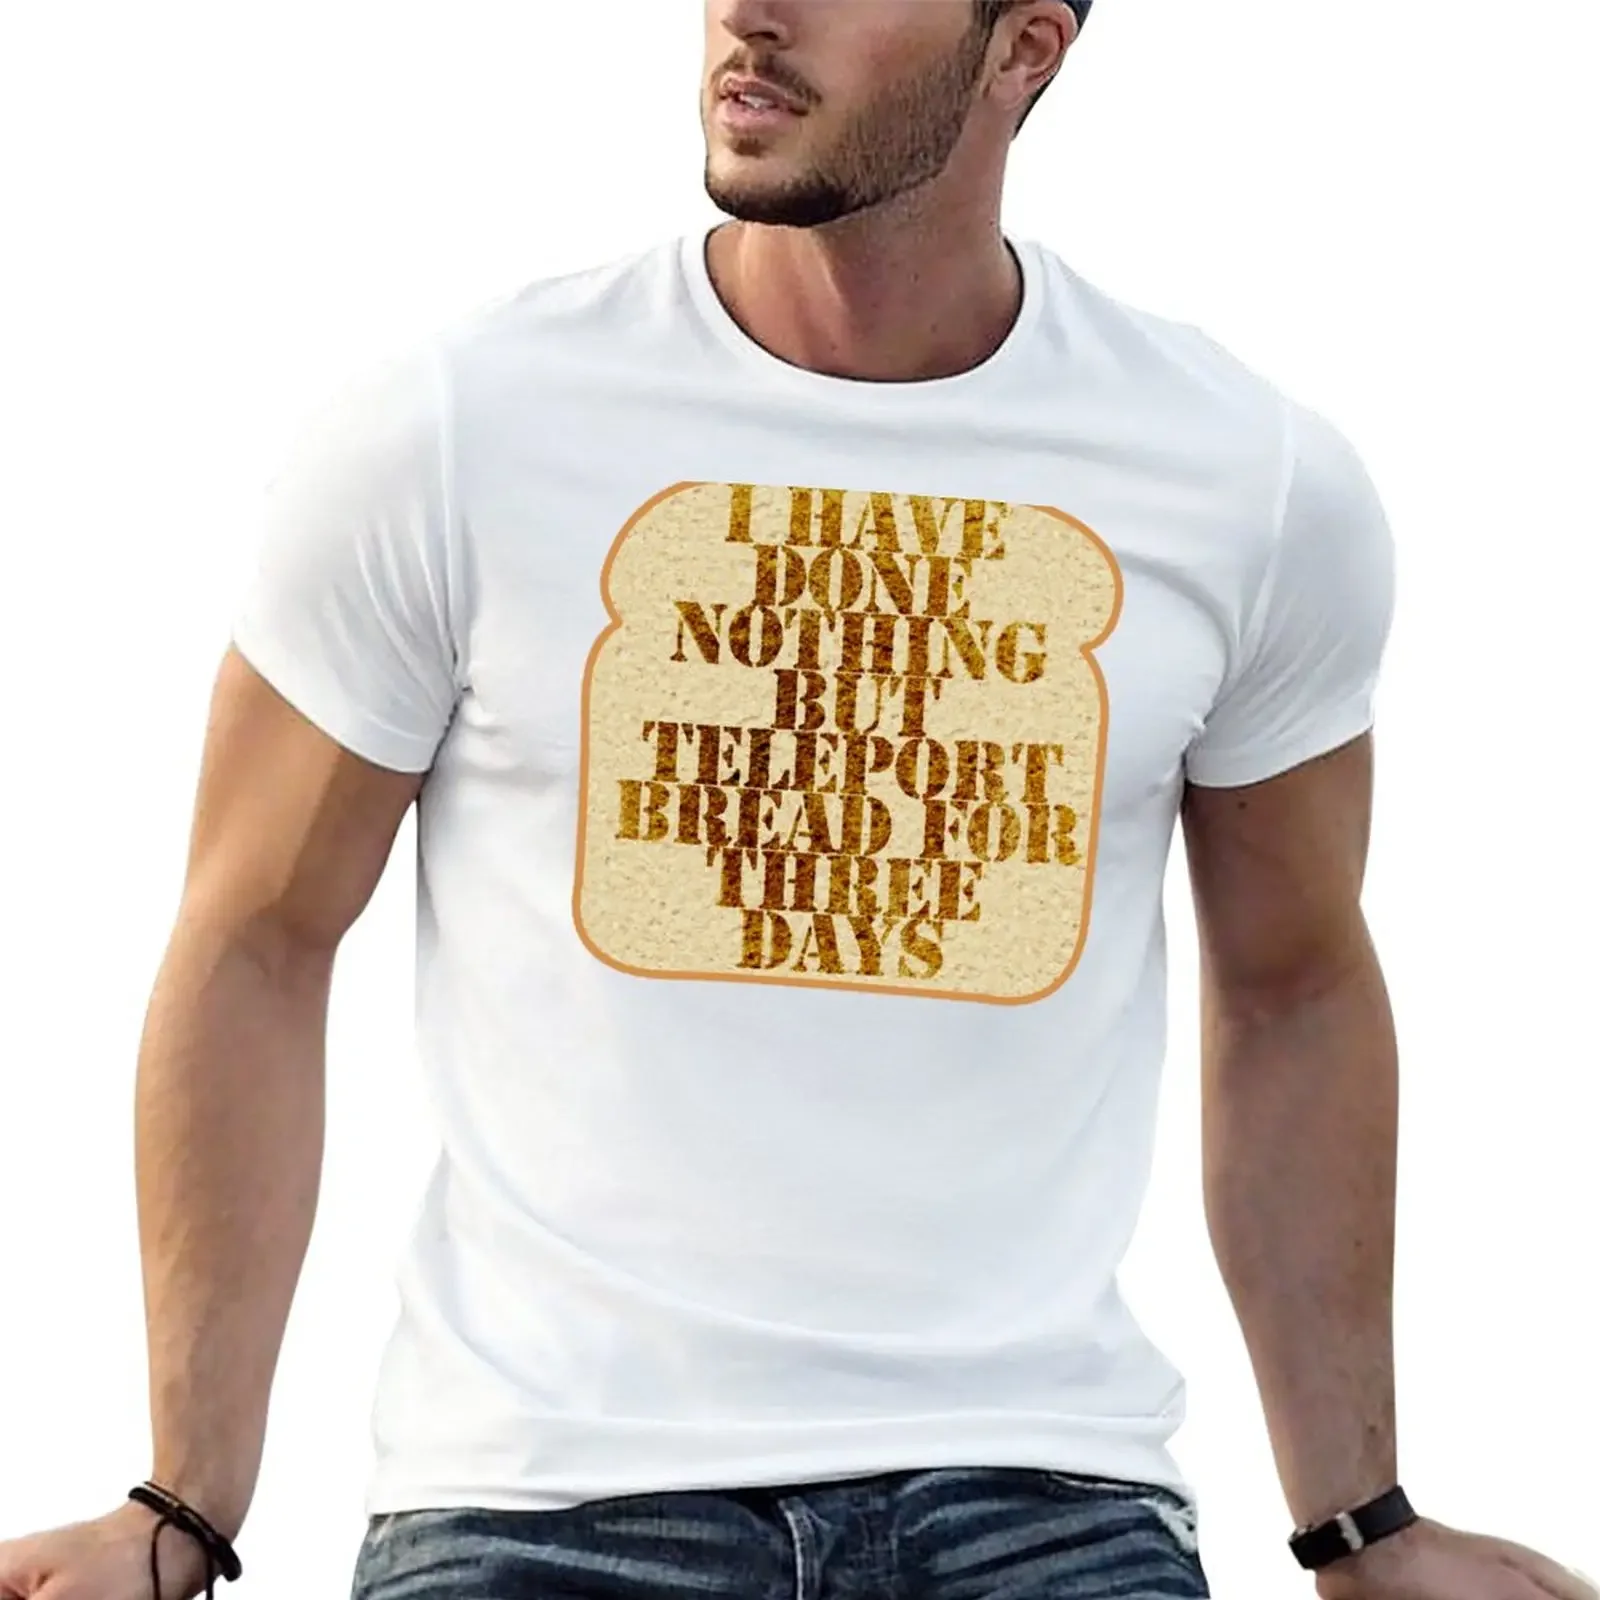 

I have done nothing but Teleport Bread for three days. T-Shirt shirts graphic tees plain summer top men t shirt